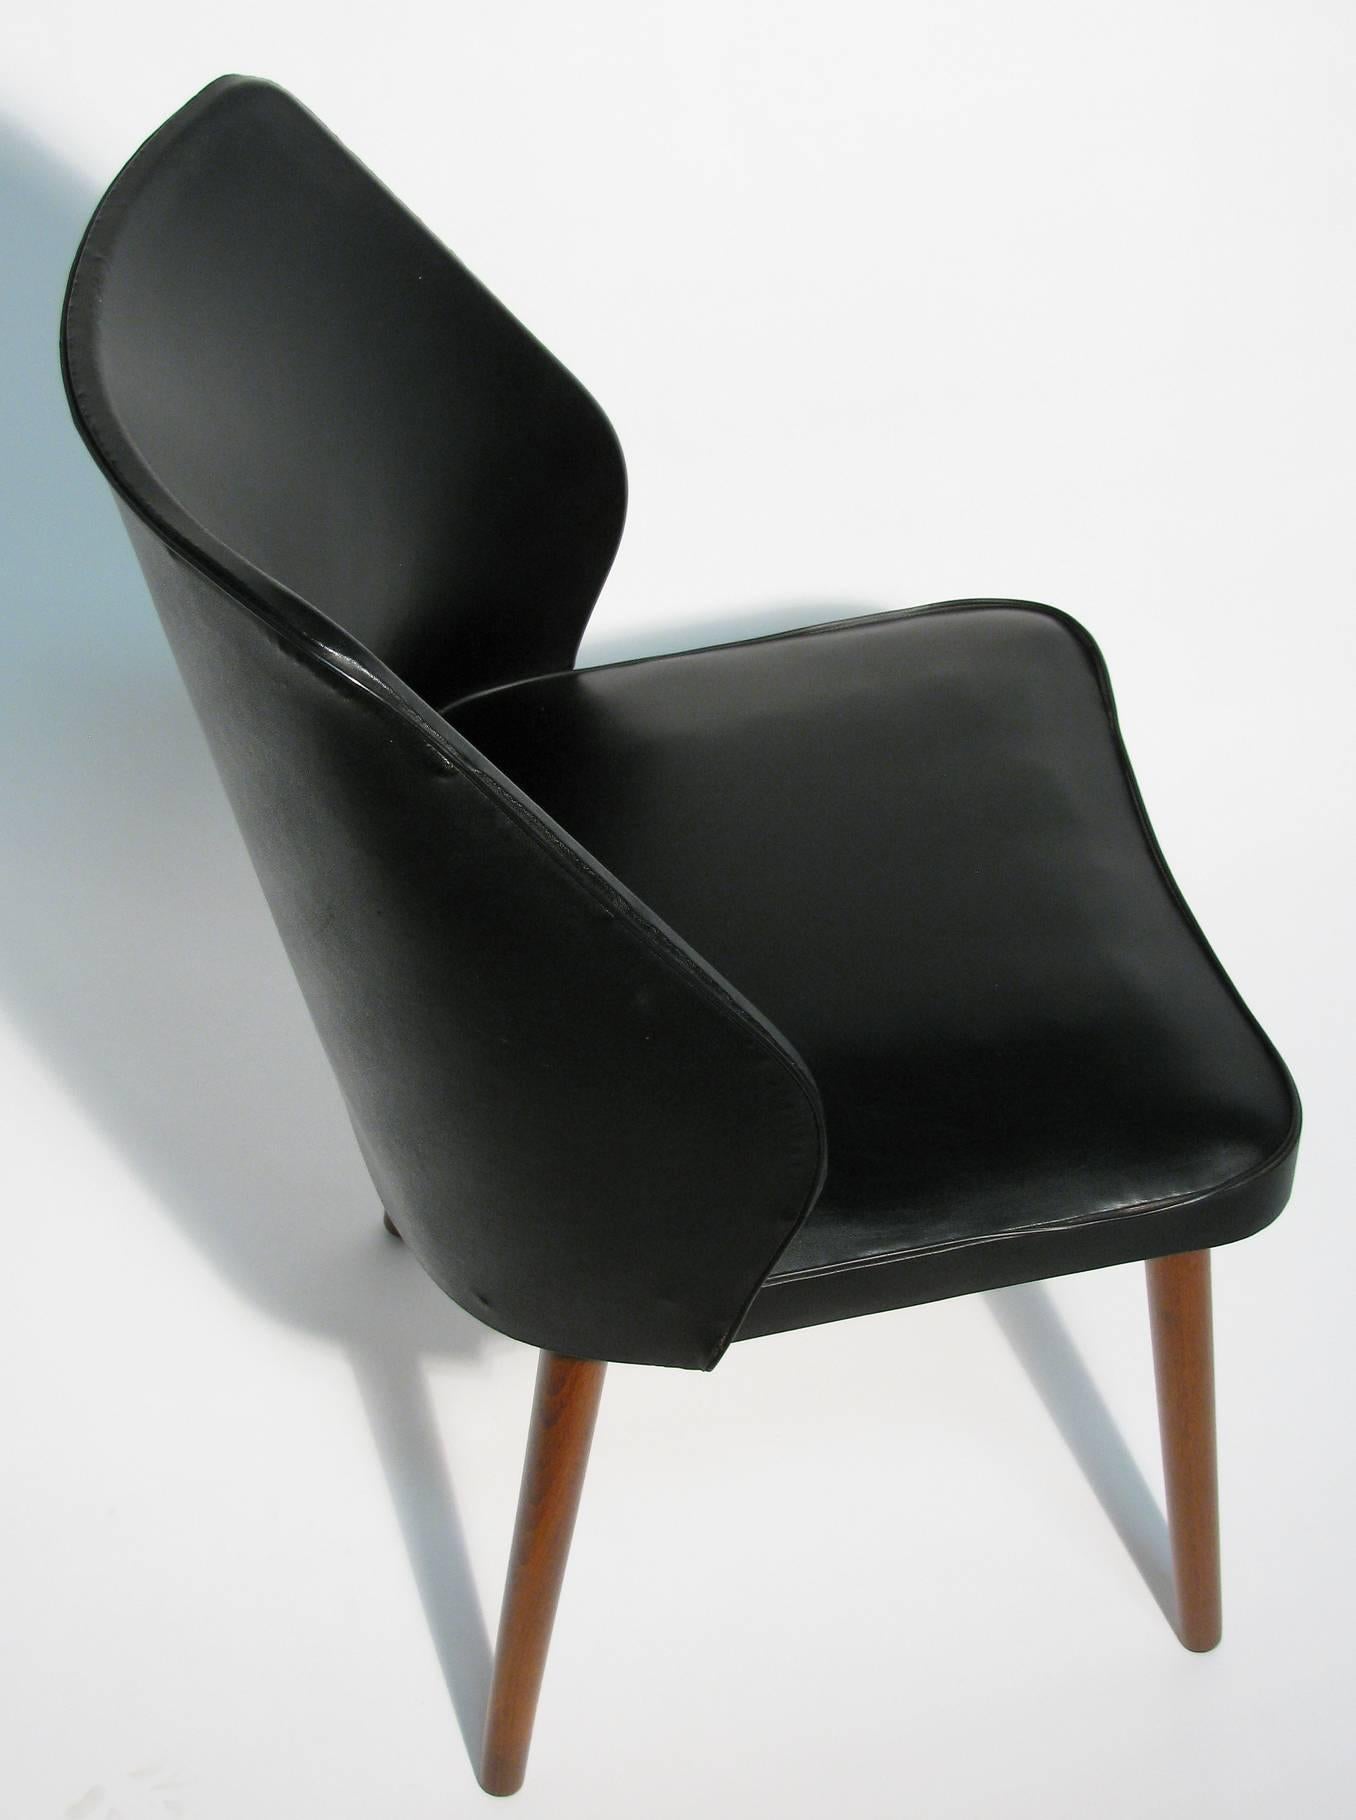 20th Century Danish Modernist Occasional Chair For Sale